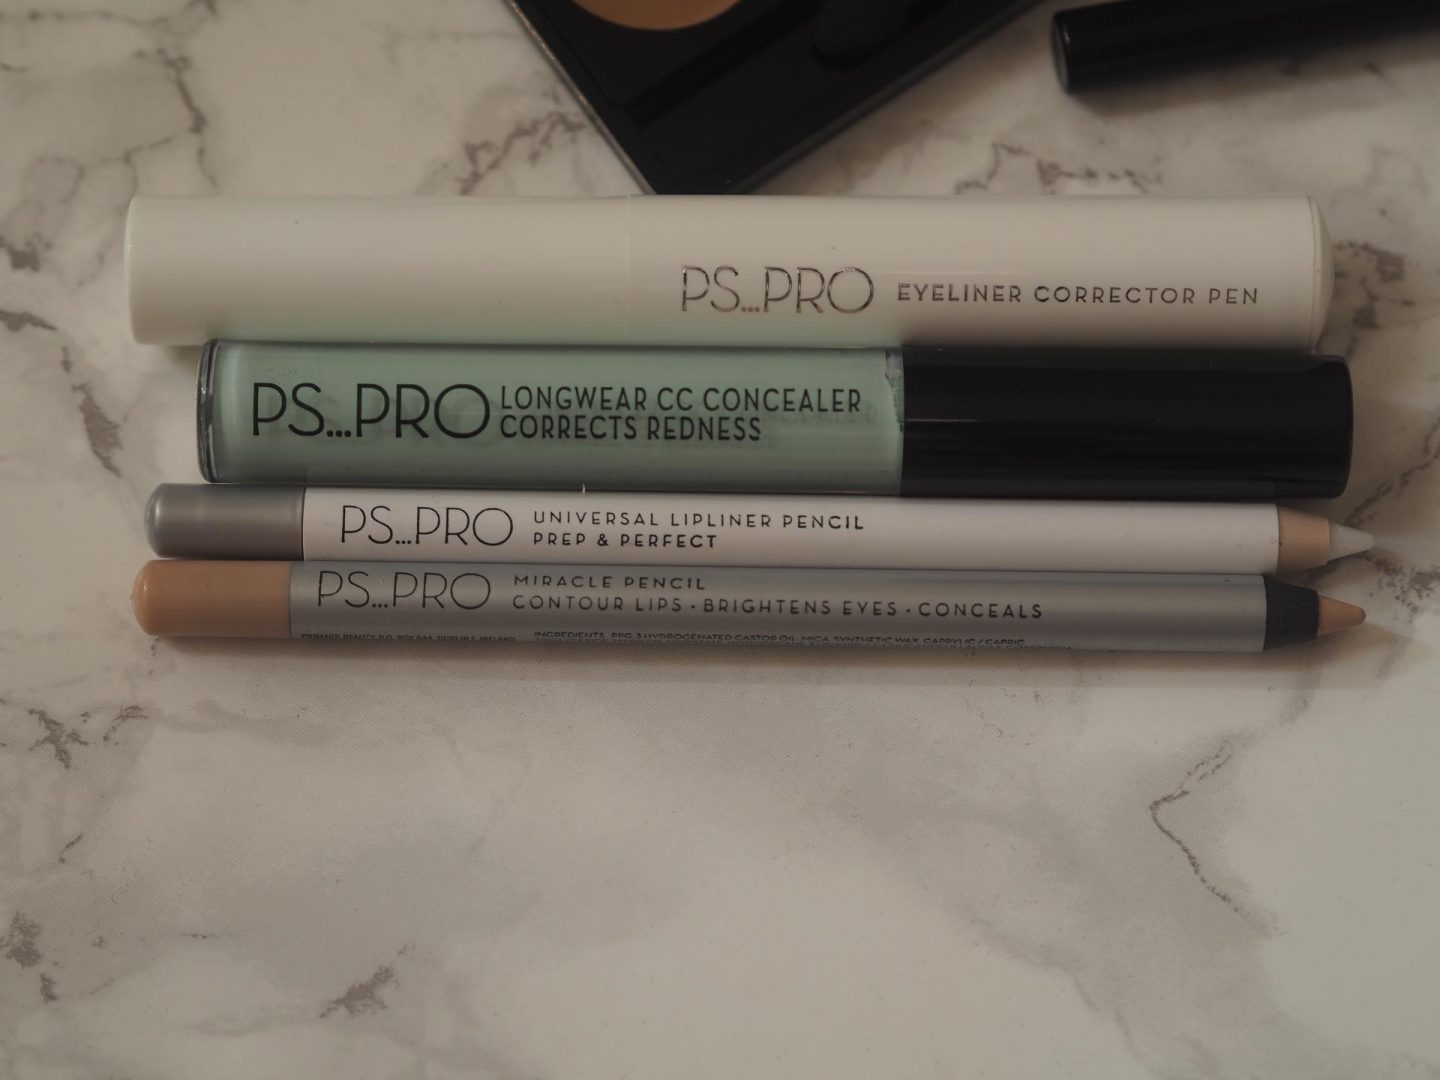 Primark PS Pro - Products: Eyeliner Correction Pen, Longwear CC Concealer Corrects Redness, Universal Liplined Pencil & Miracle Pencil